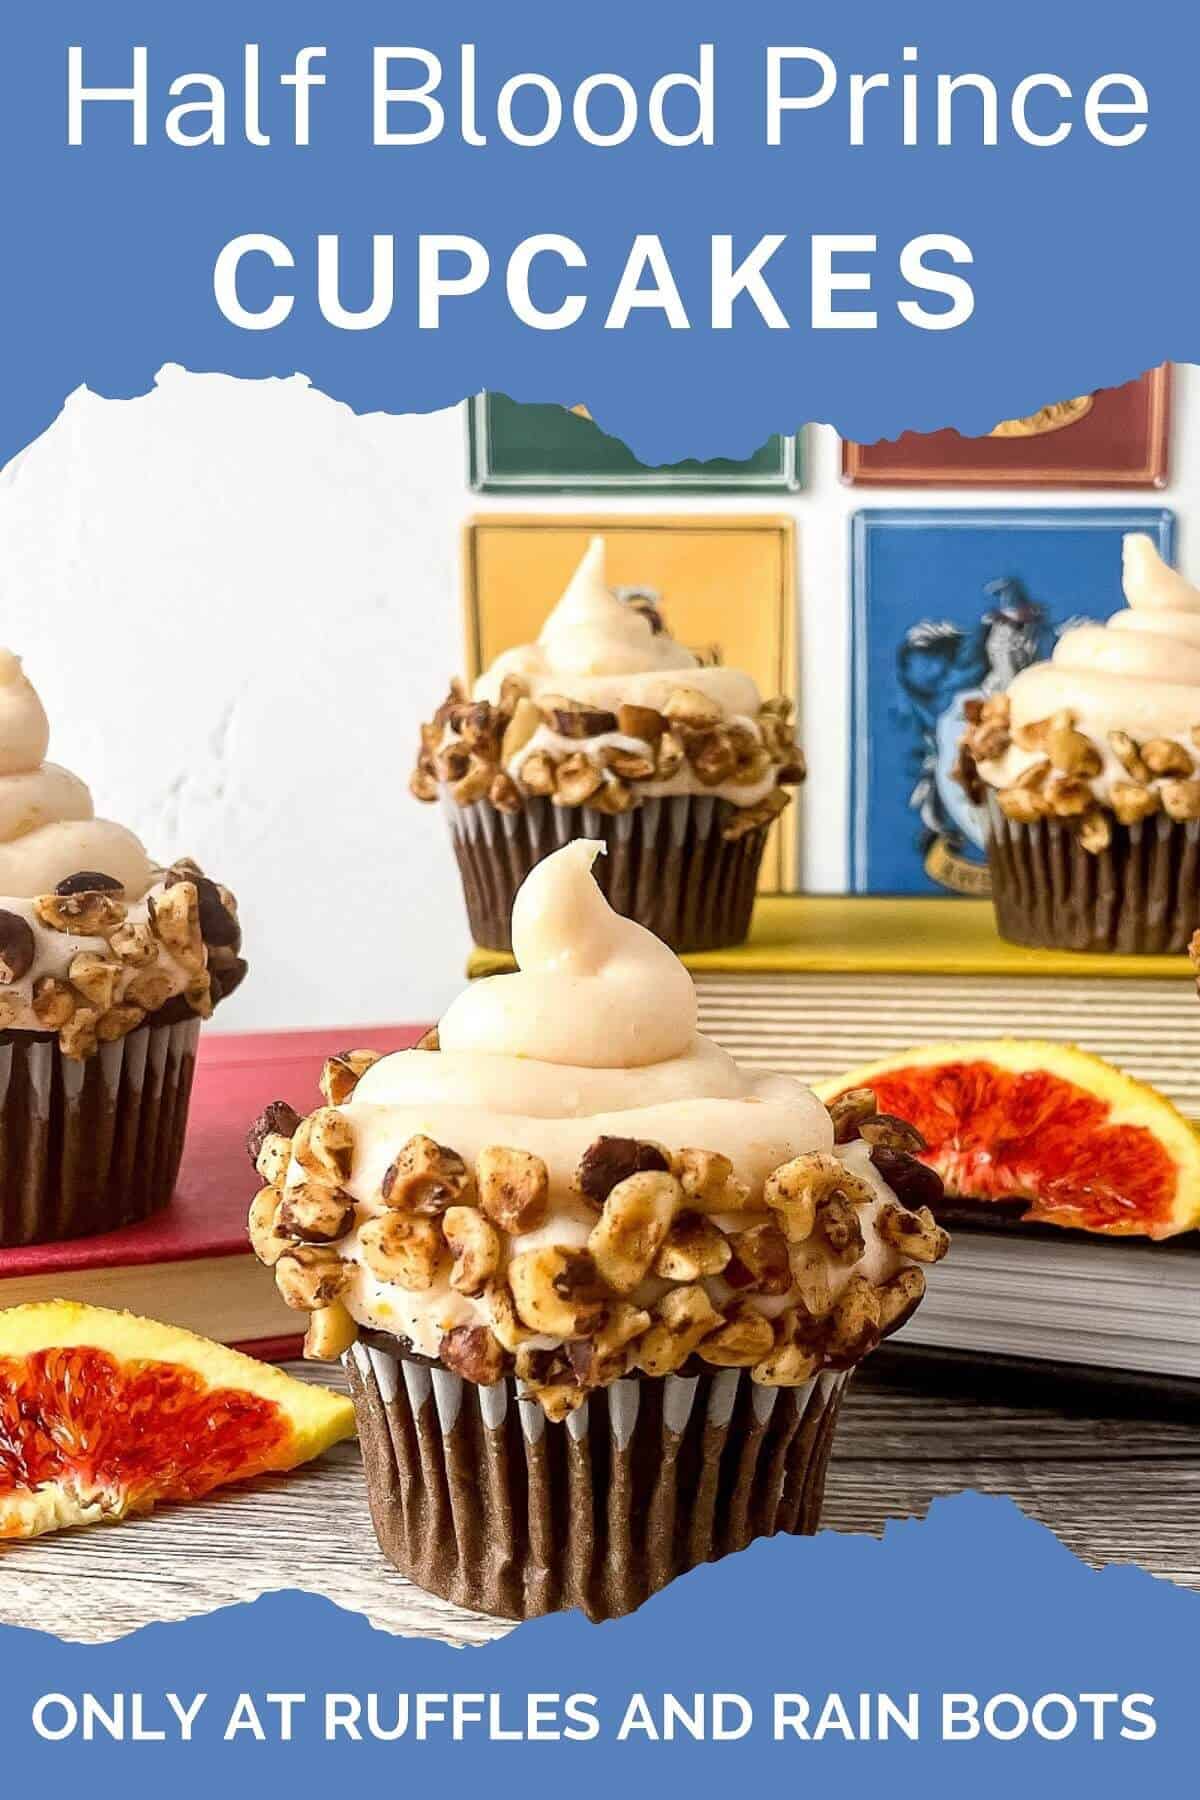 Vertical close up of a frosted cupcake with hazelnuts, next to 2 slices of a blood orange with 3 cupcakes in the background next to books and the Hogwarts house emblems on a weathered wood surface.